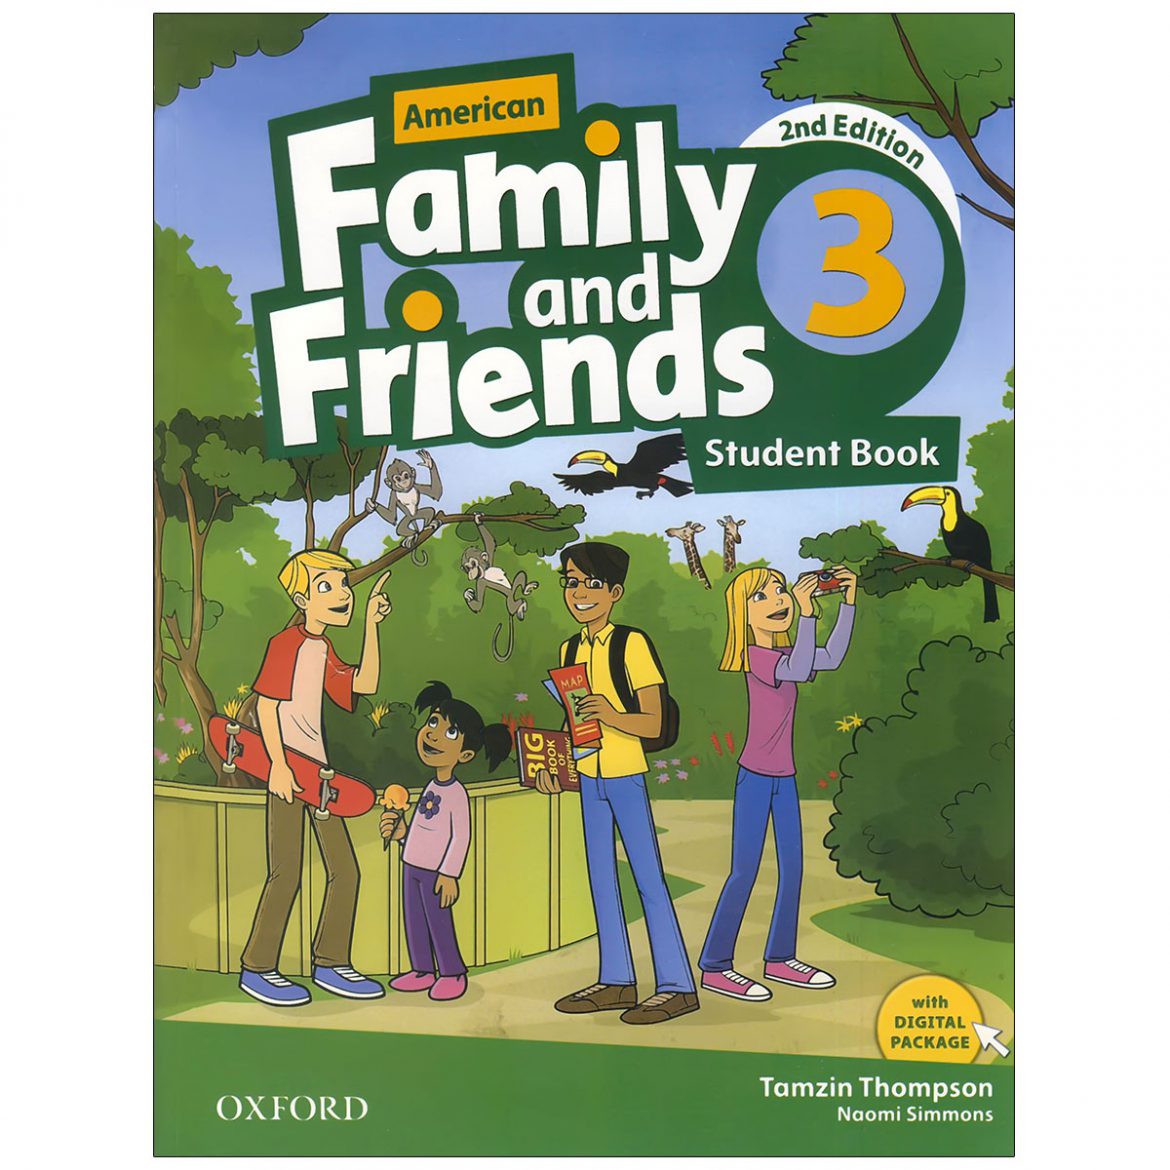 Wordwall family and friends 4. Family and friends 2 Edition Classbook. 2nd Edition Family friends Workbook Oxford Naomi Simmons. Oxford Family and friends 3. Family and friends 3 class book.